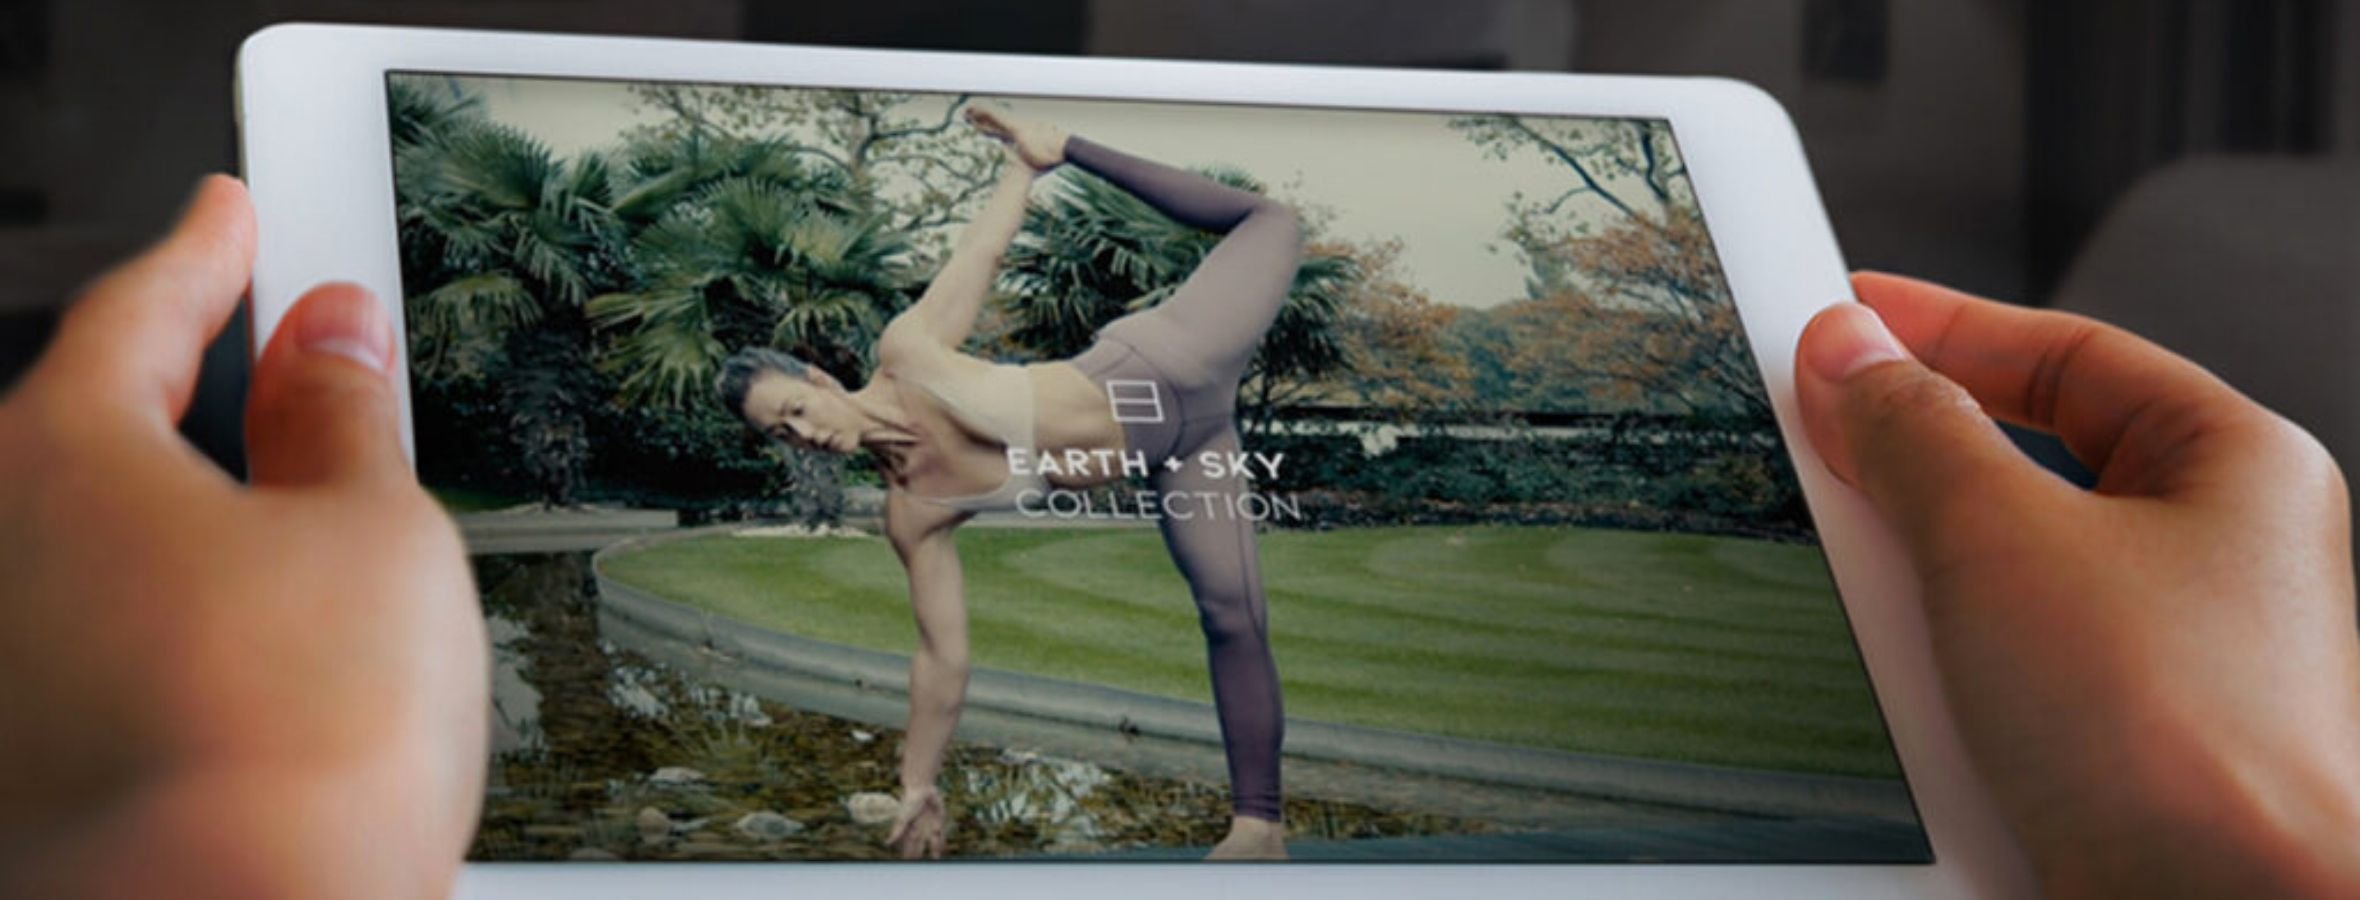 A tablet showing a virtual fitness app with a woman holding a yoga pose